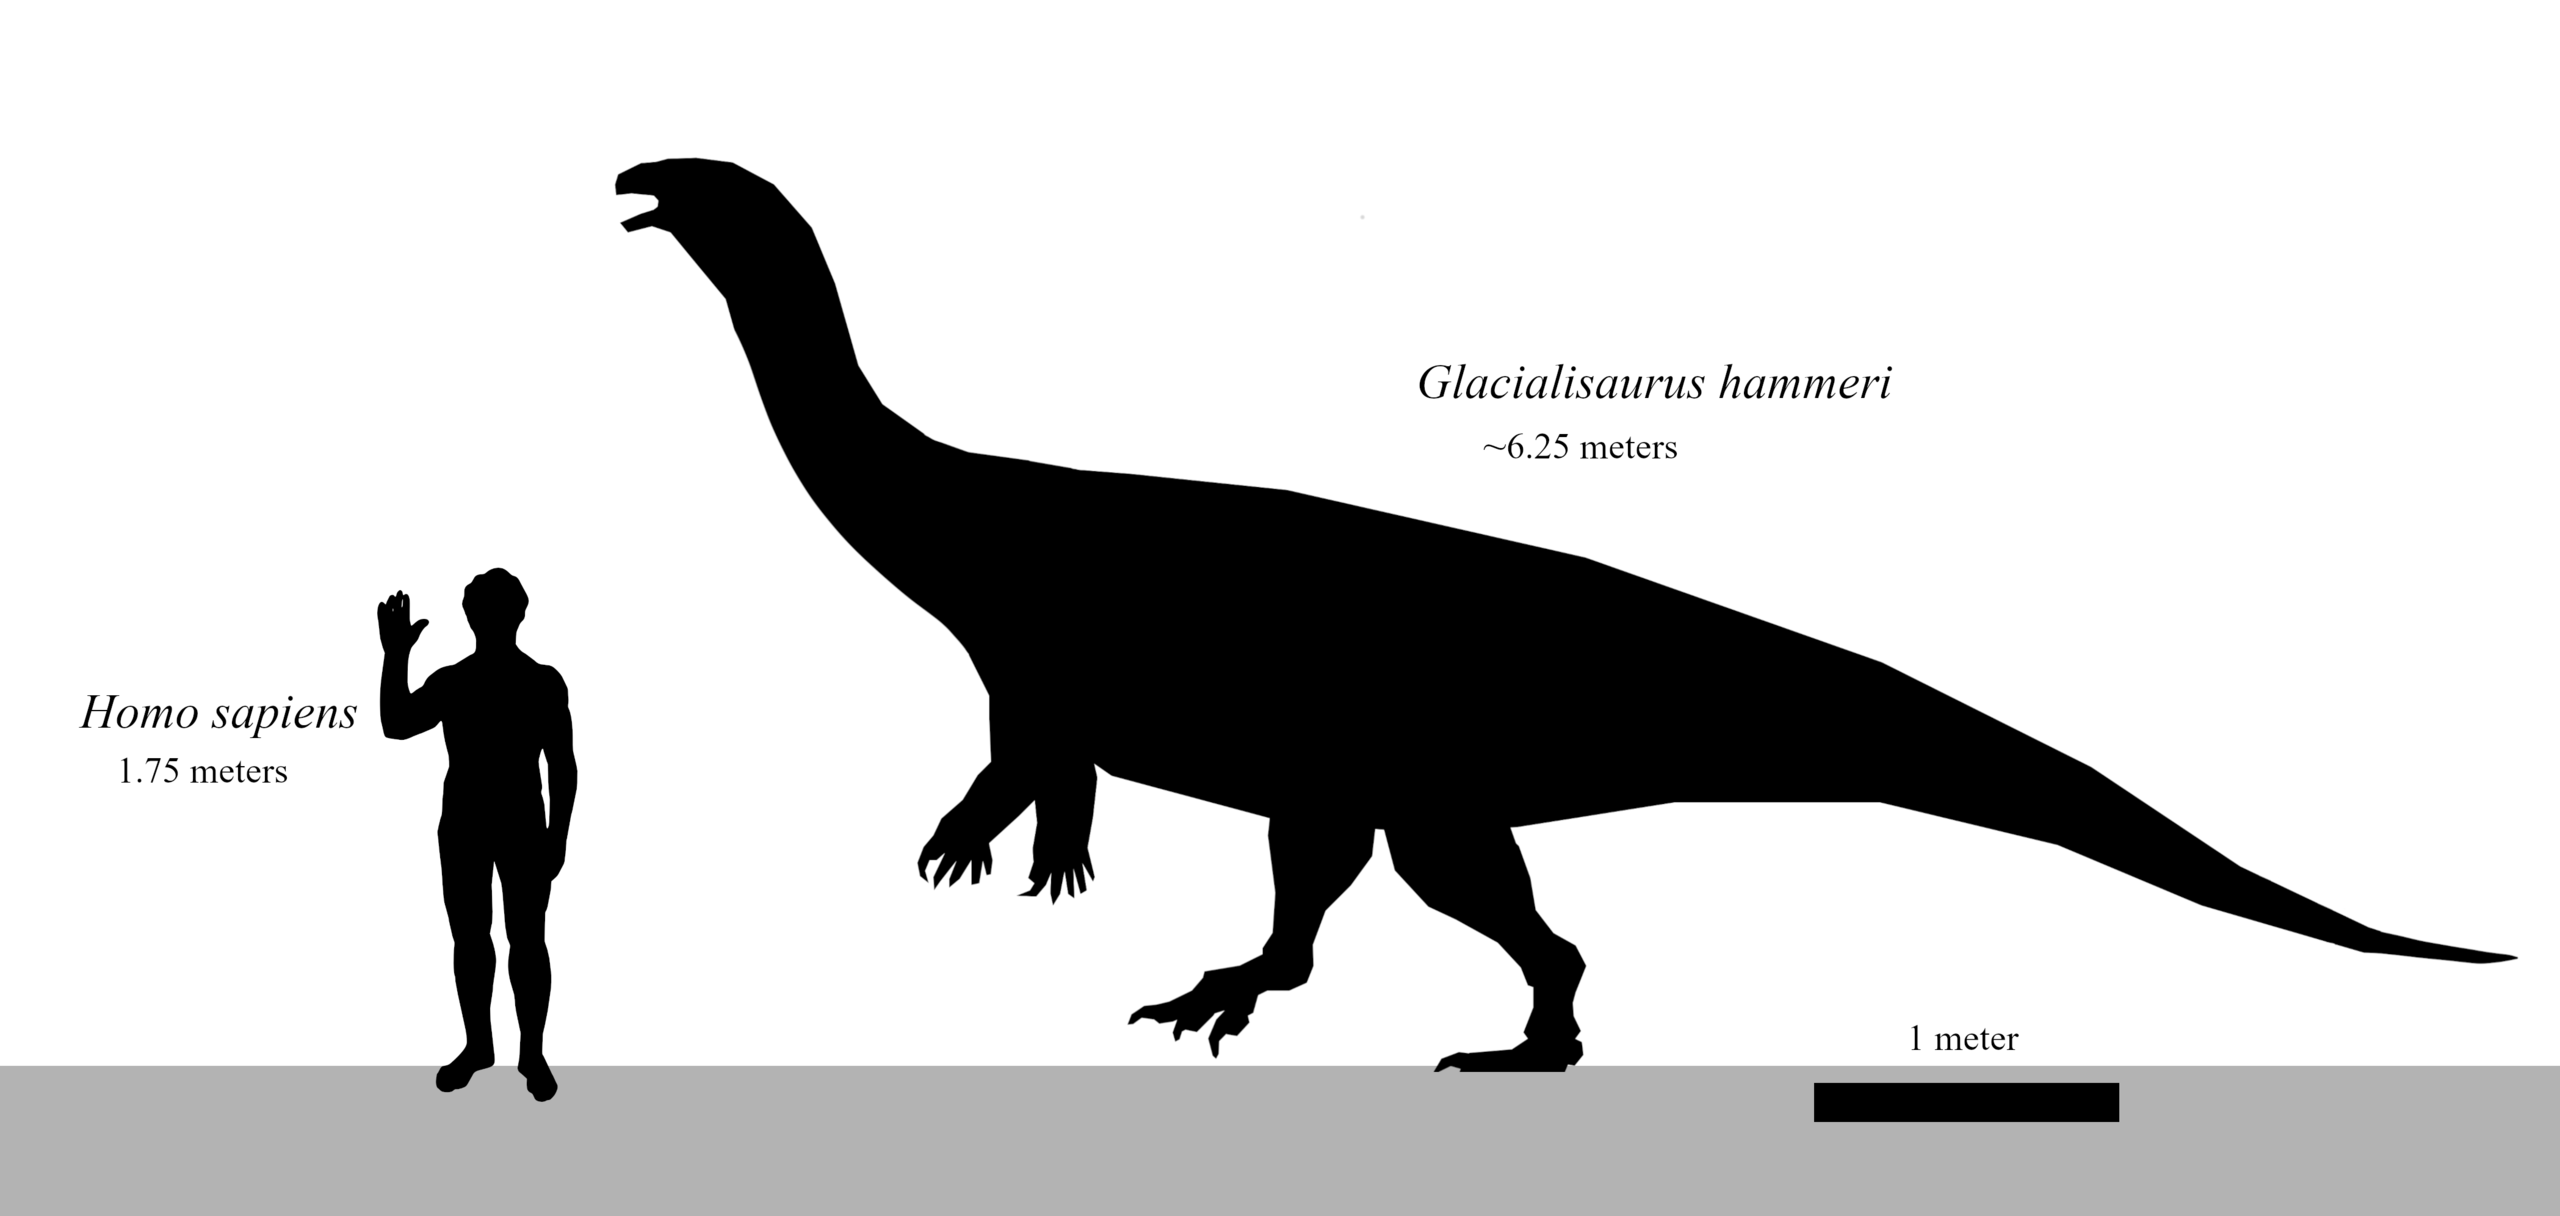 Silhouettes of a human and a dinosaur